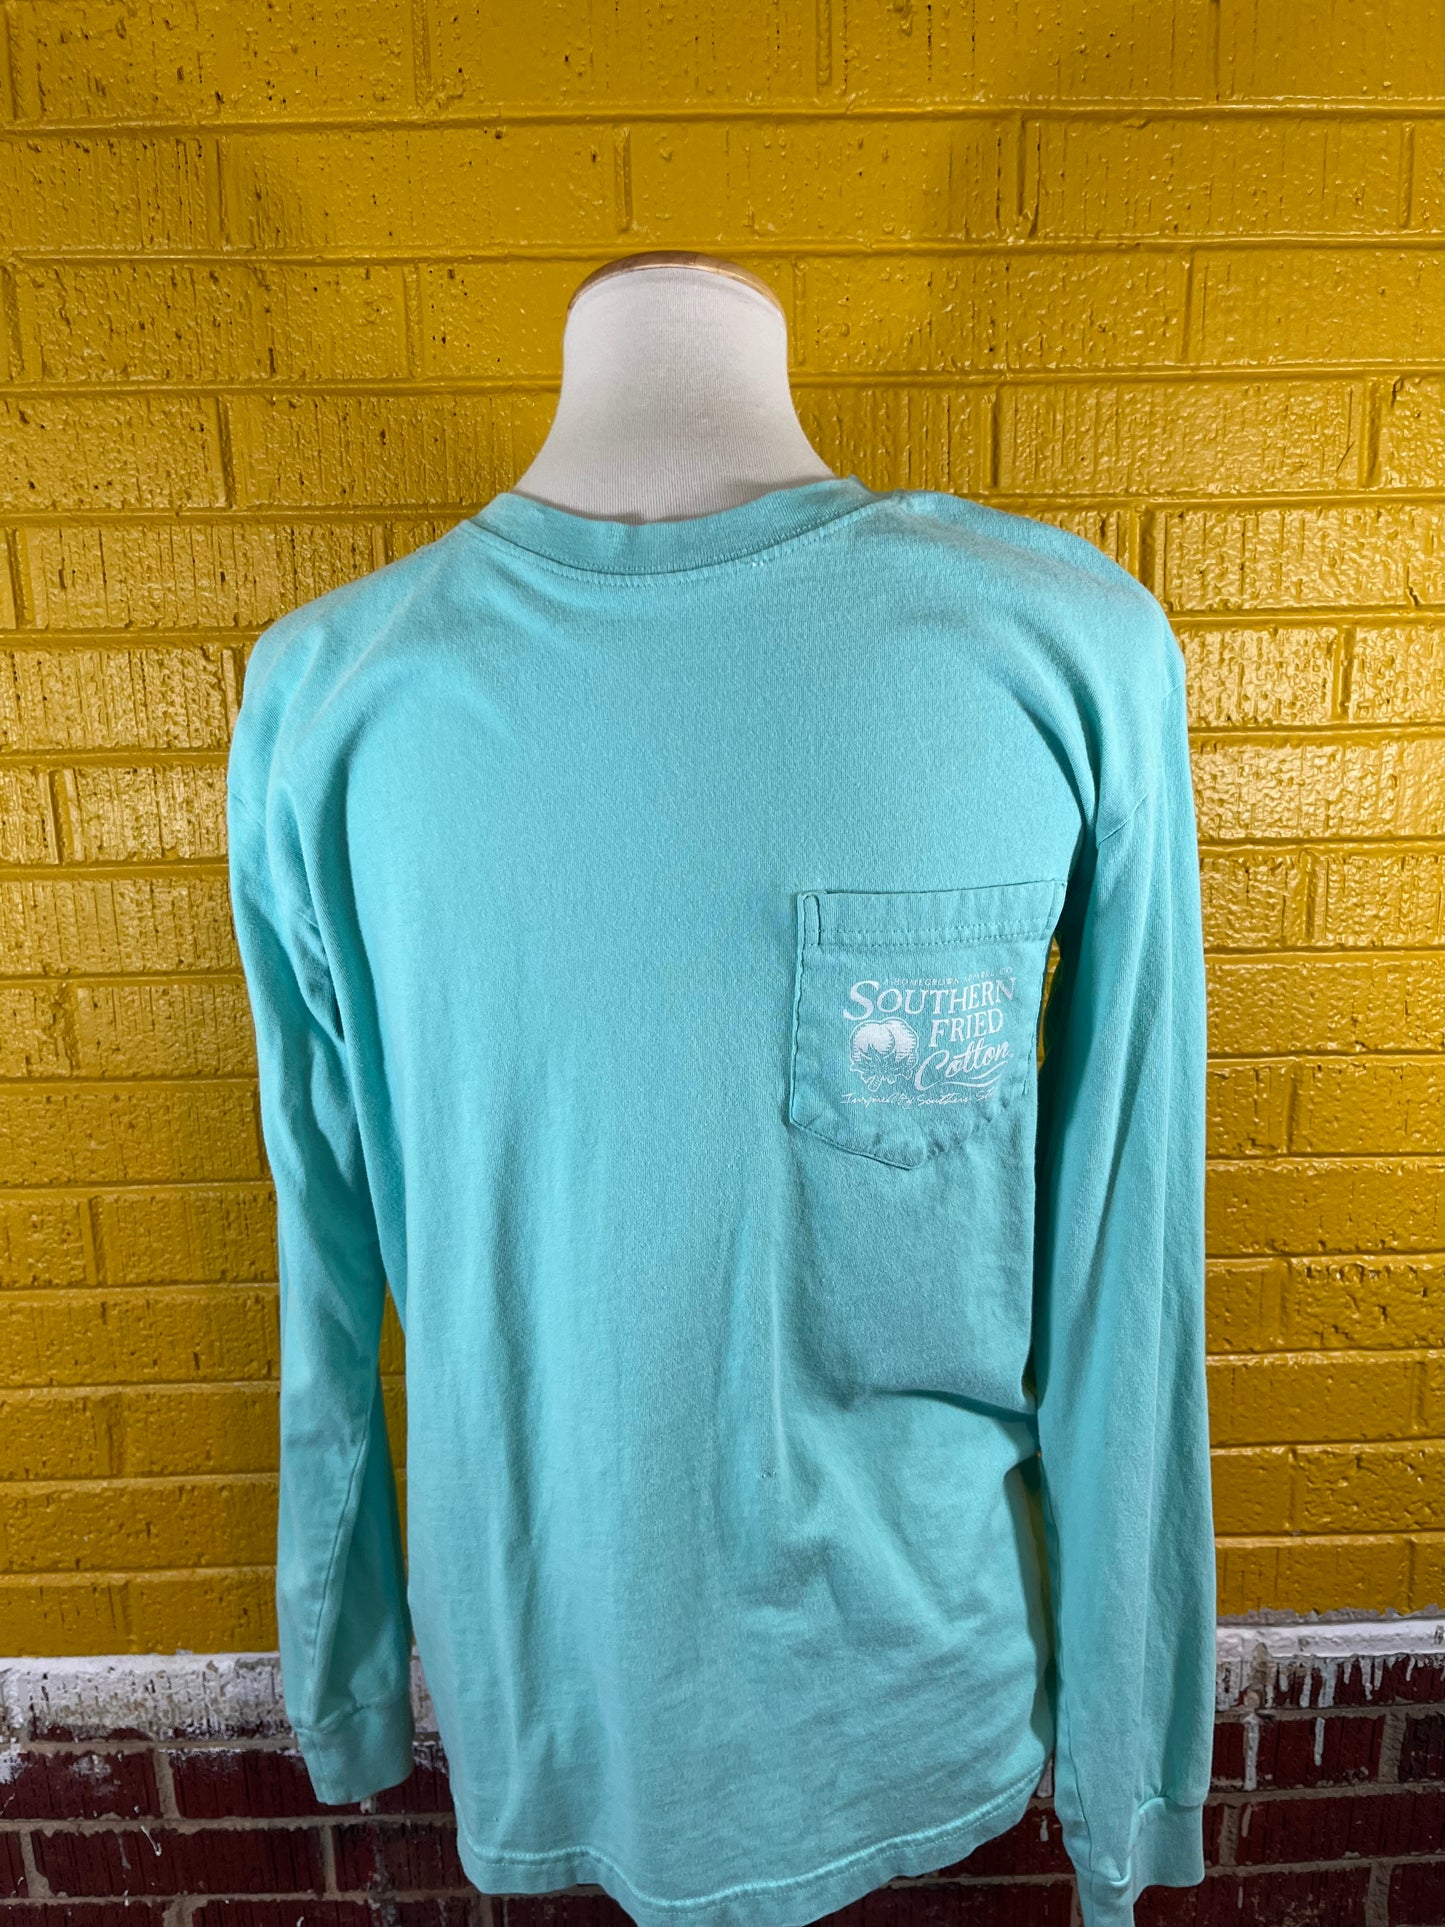 Southern Fried Cotton - Sz Adult Small